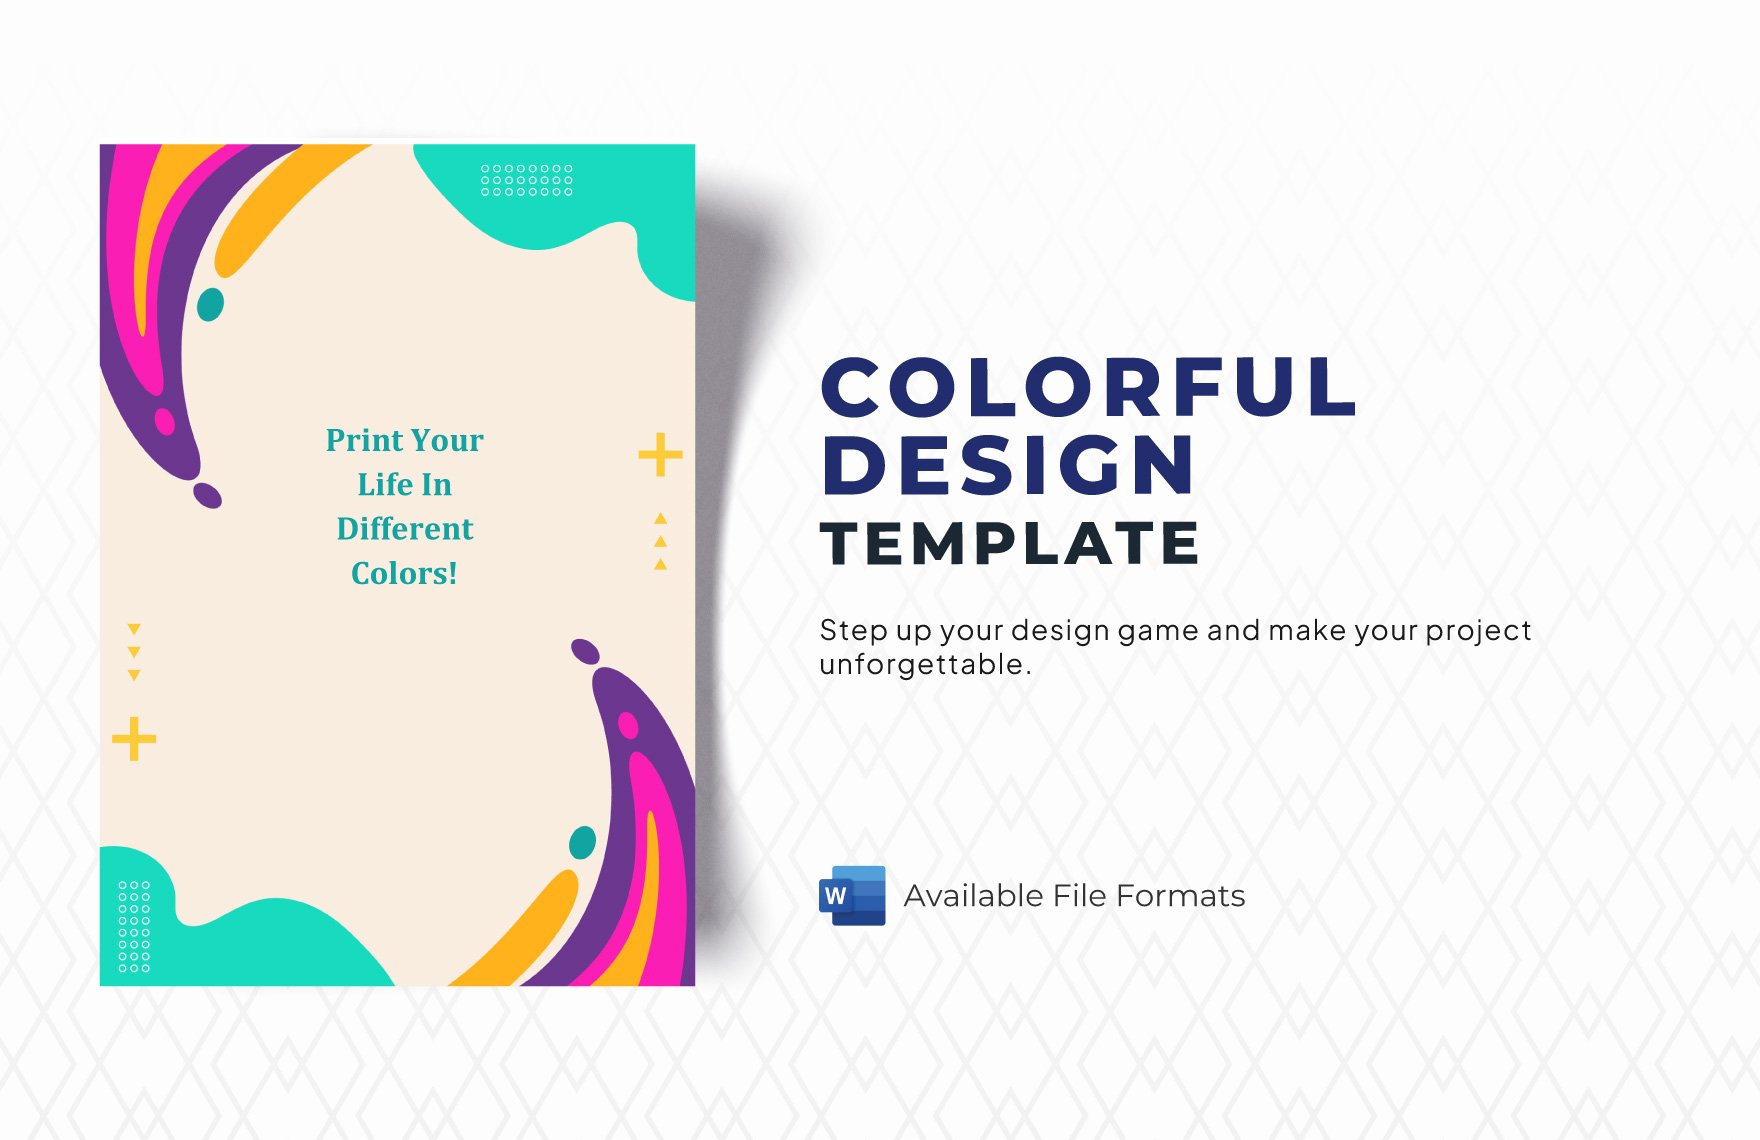 Free Colorful Design Template in Word